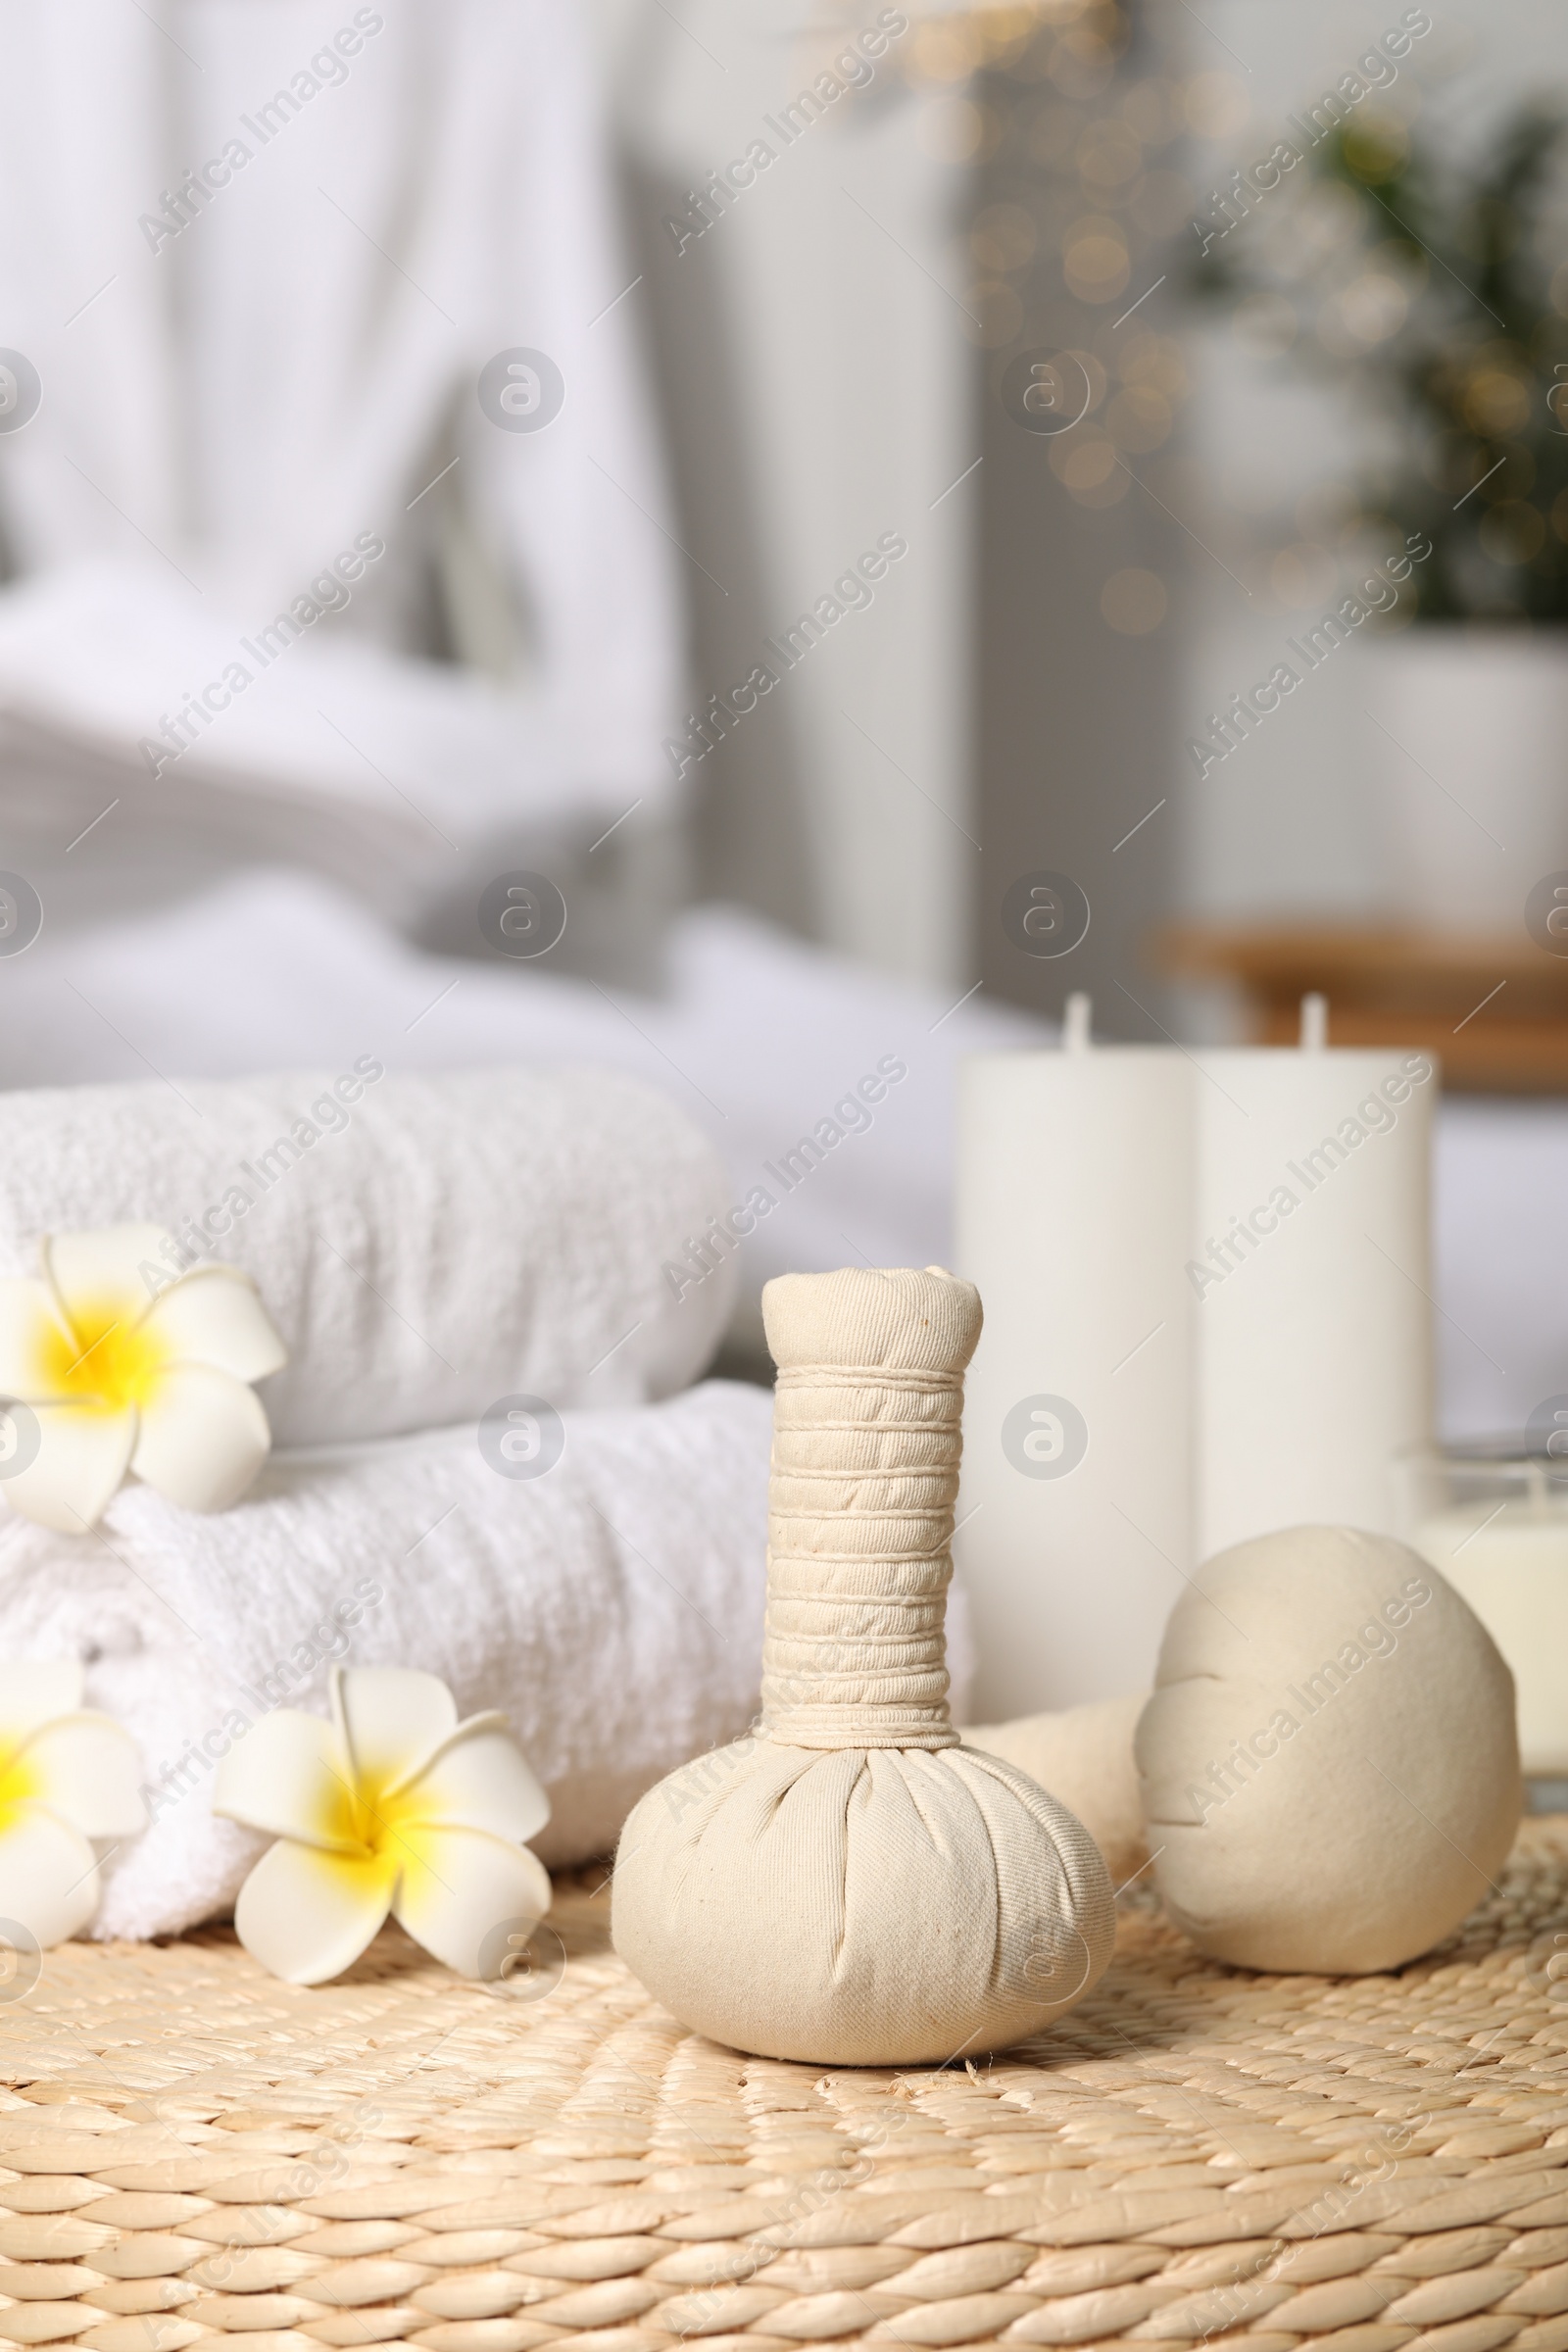 Photo of Herbal bags, candles, rolled towels and beautiful flowers on wicker surface indoors. Spa products